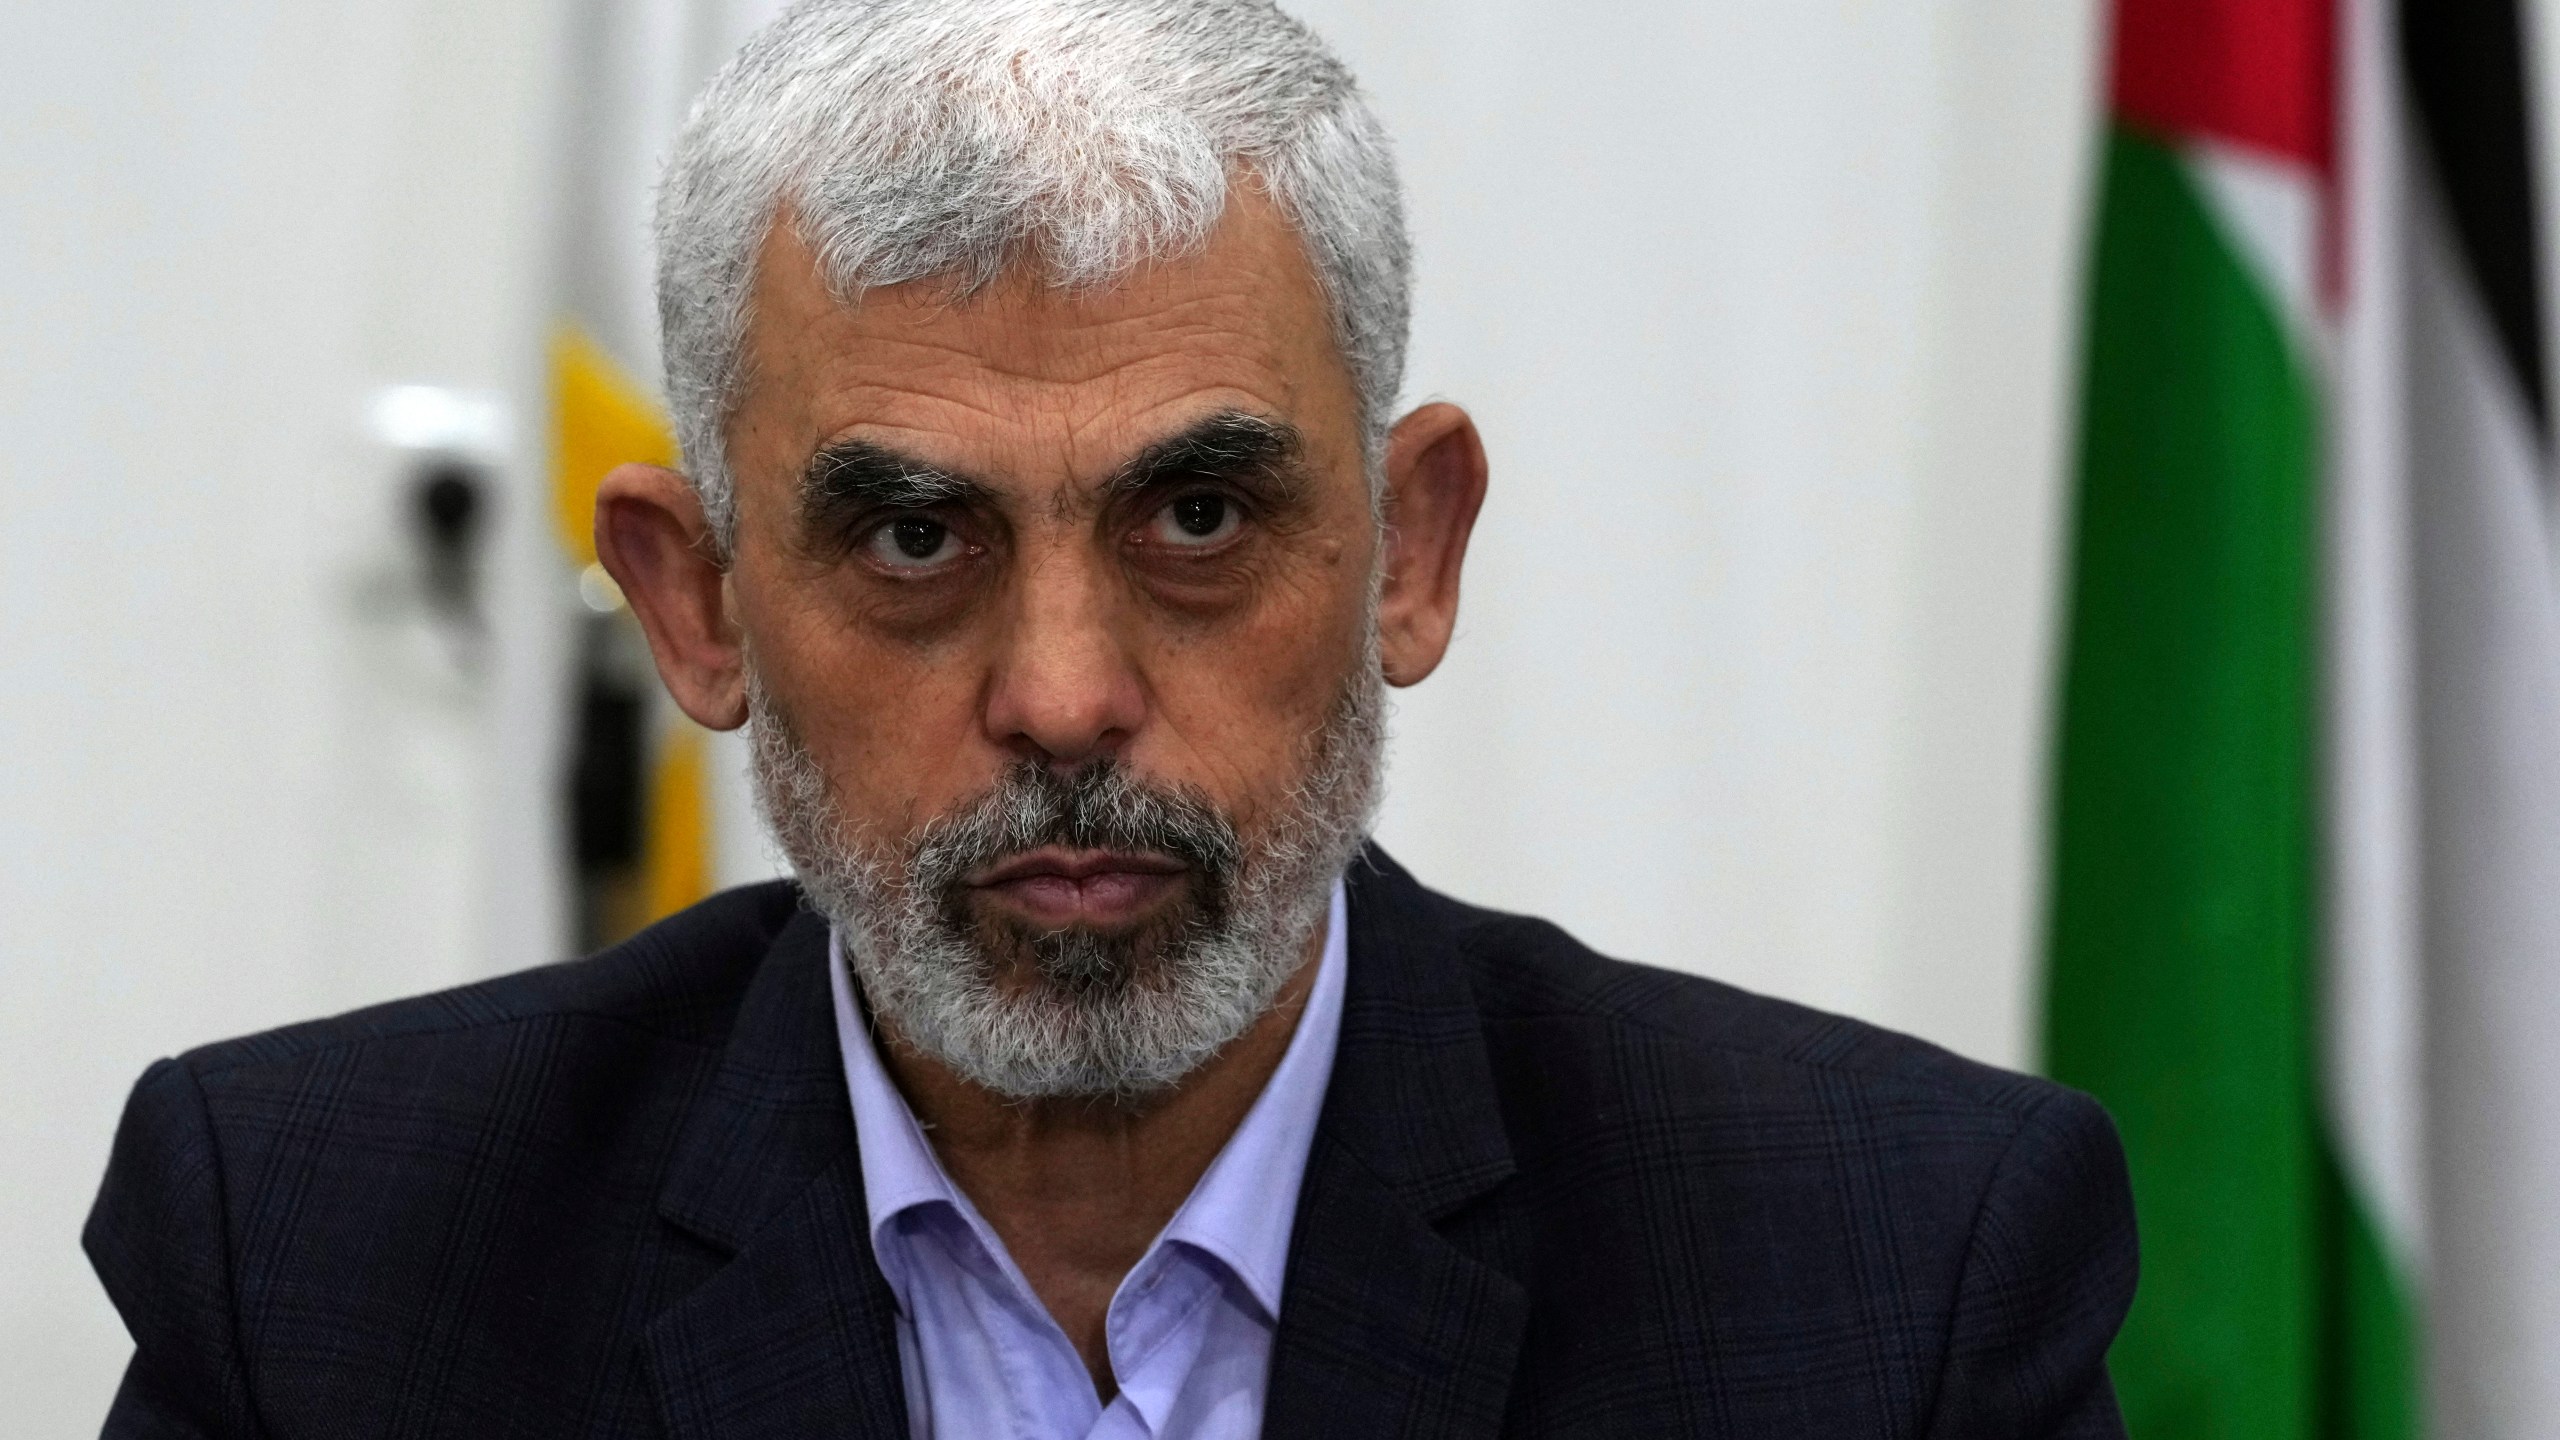 FILE - Yehya Sinwar, head of Hamas in Gaza, chairs a meeting with leaders of Palestinian factions at his office in Gaza City, Wednesday, April 13, 2022. Israel can either try to annihilate Hamas, which would mean almost certain death for the estimated 100 hostages still held in Gaza, or it can cut a deal that would allow the militants to claim a historic victory. Either outcome would be excruciating for Israelis. And either might be seen as acceptable by Hamas, which valorizes martyrdom. (AP Photo/Adel Hana, File)